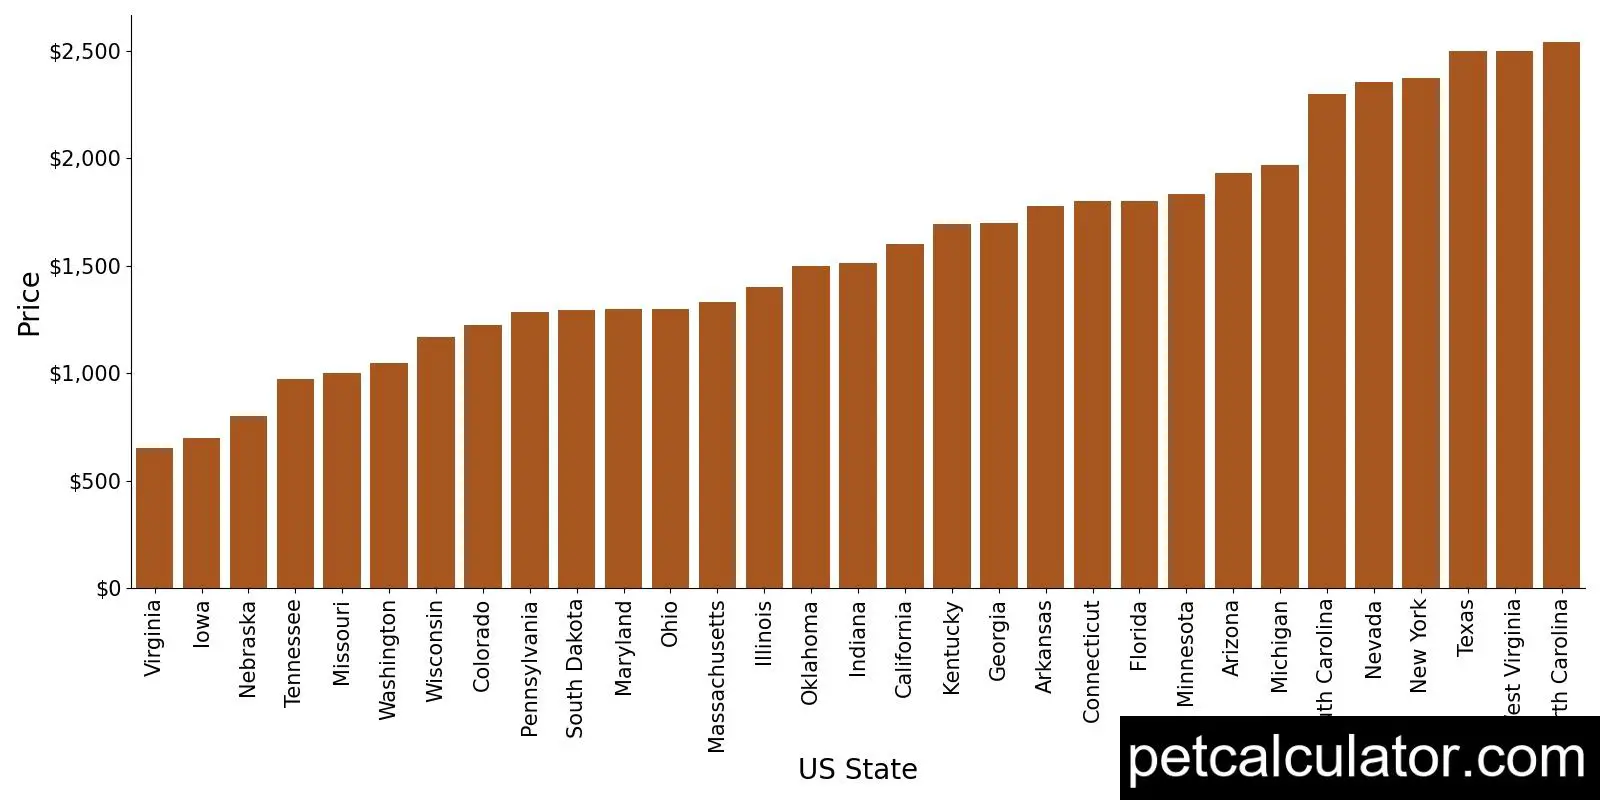 Price of Lhasa Apso by US State 